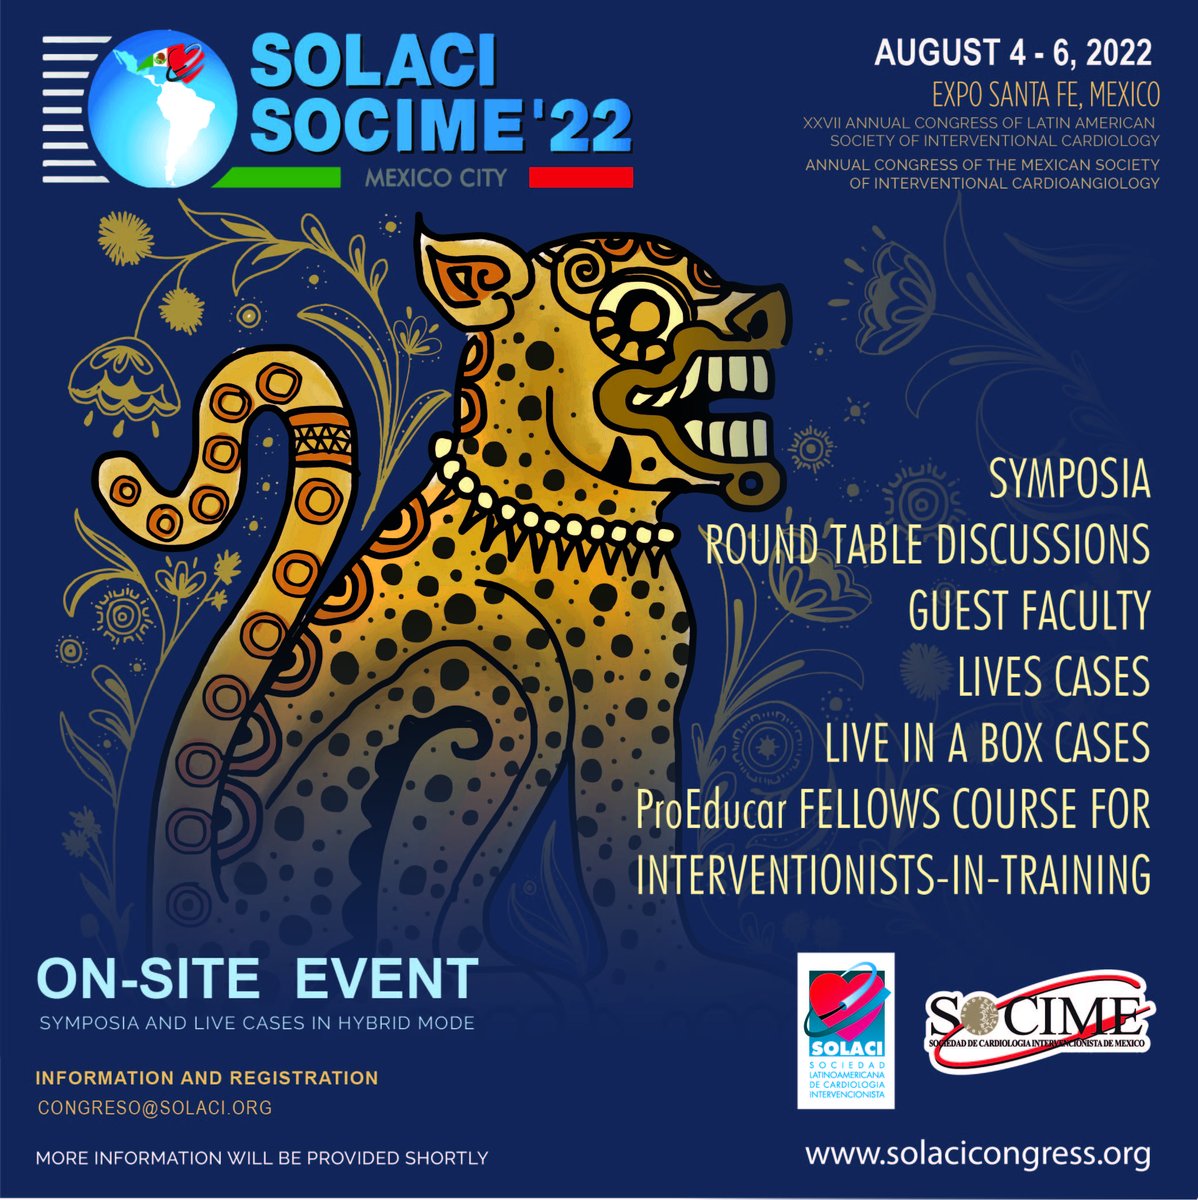 ✅ Register for SOLACI-SOCIME 2022 ▶ Until June 18 you can register for the largest gathering of interventional cardiologists in Latin America with a 25% discount 🗓 When? - August 4-6 | On-Site event solacicongress.org/en/inscripcion… #cardiology #interventionalcardiology #SOLACI #SOCIME